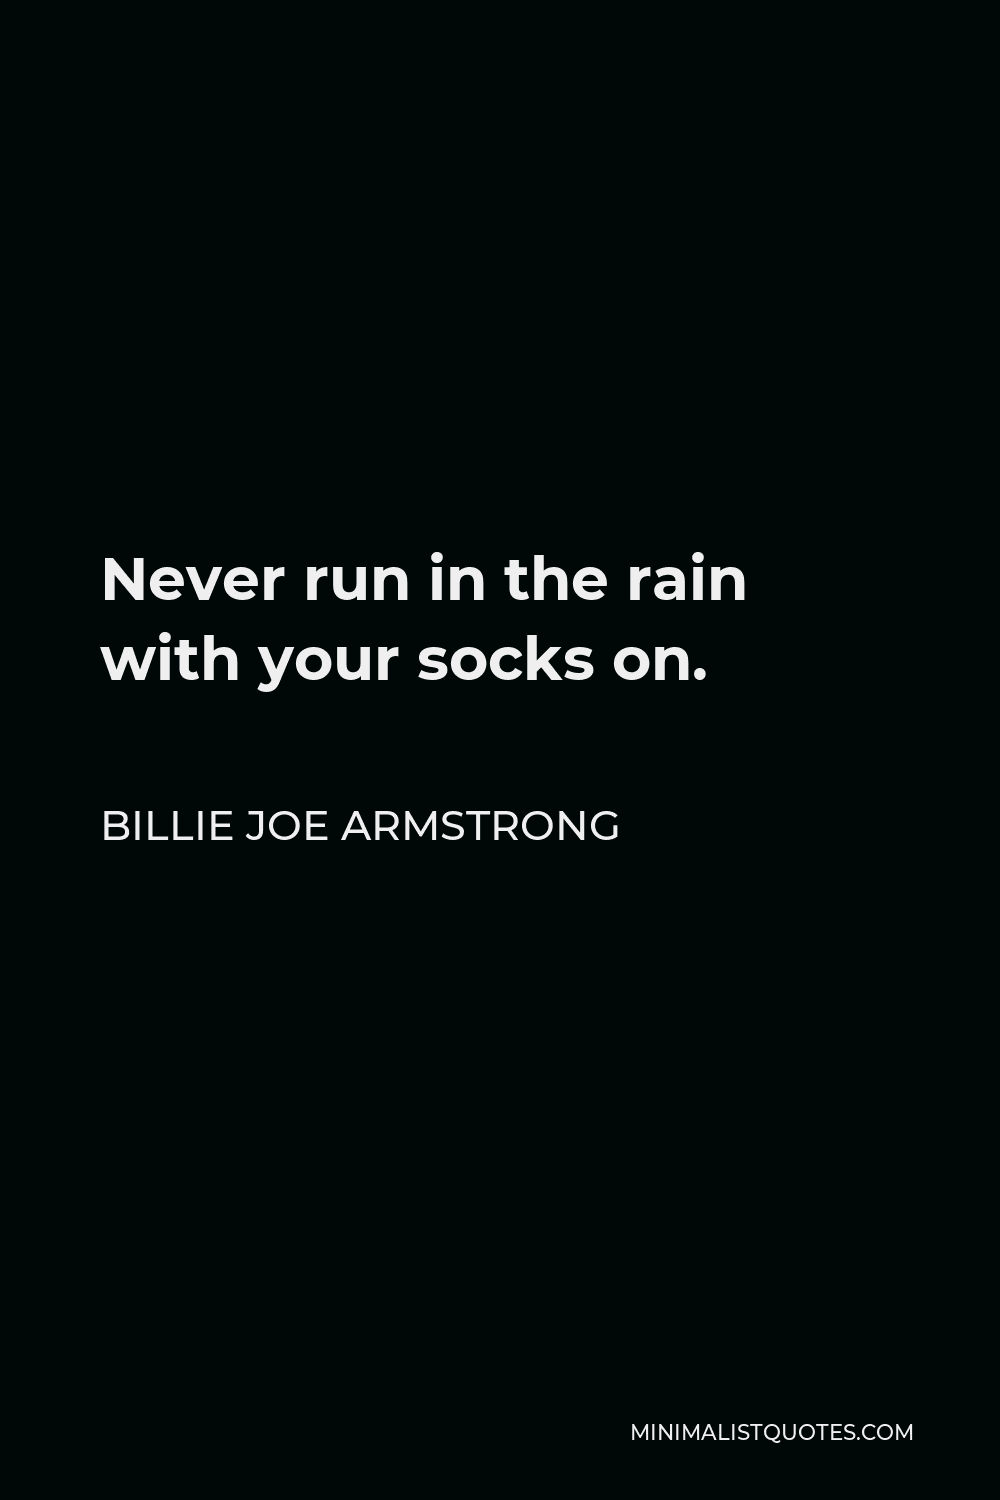 Billie Joe Armstrong Quote - Never run in the rain with your socks on.